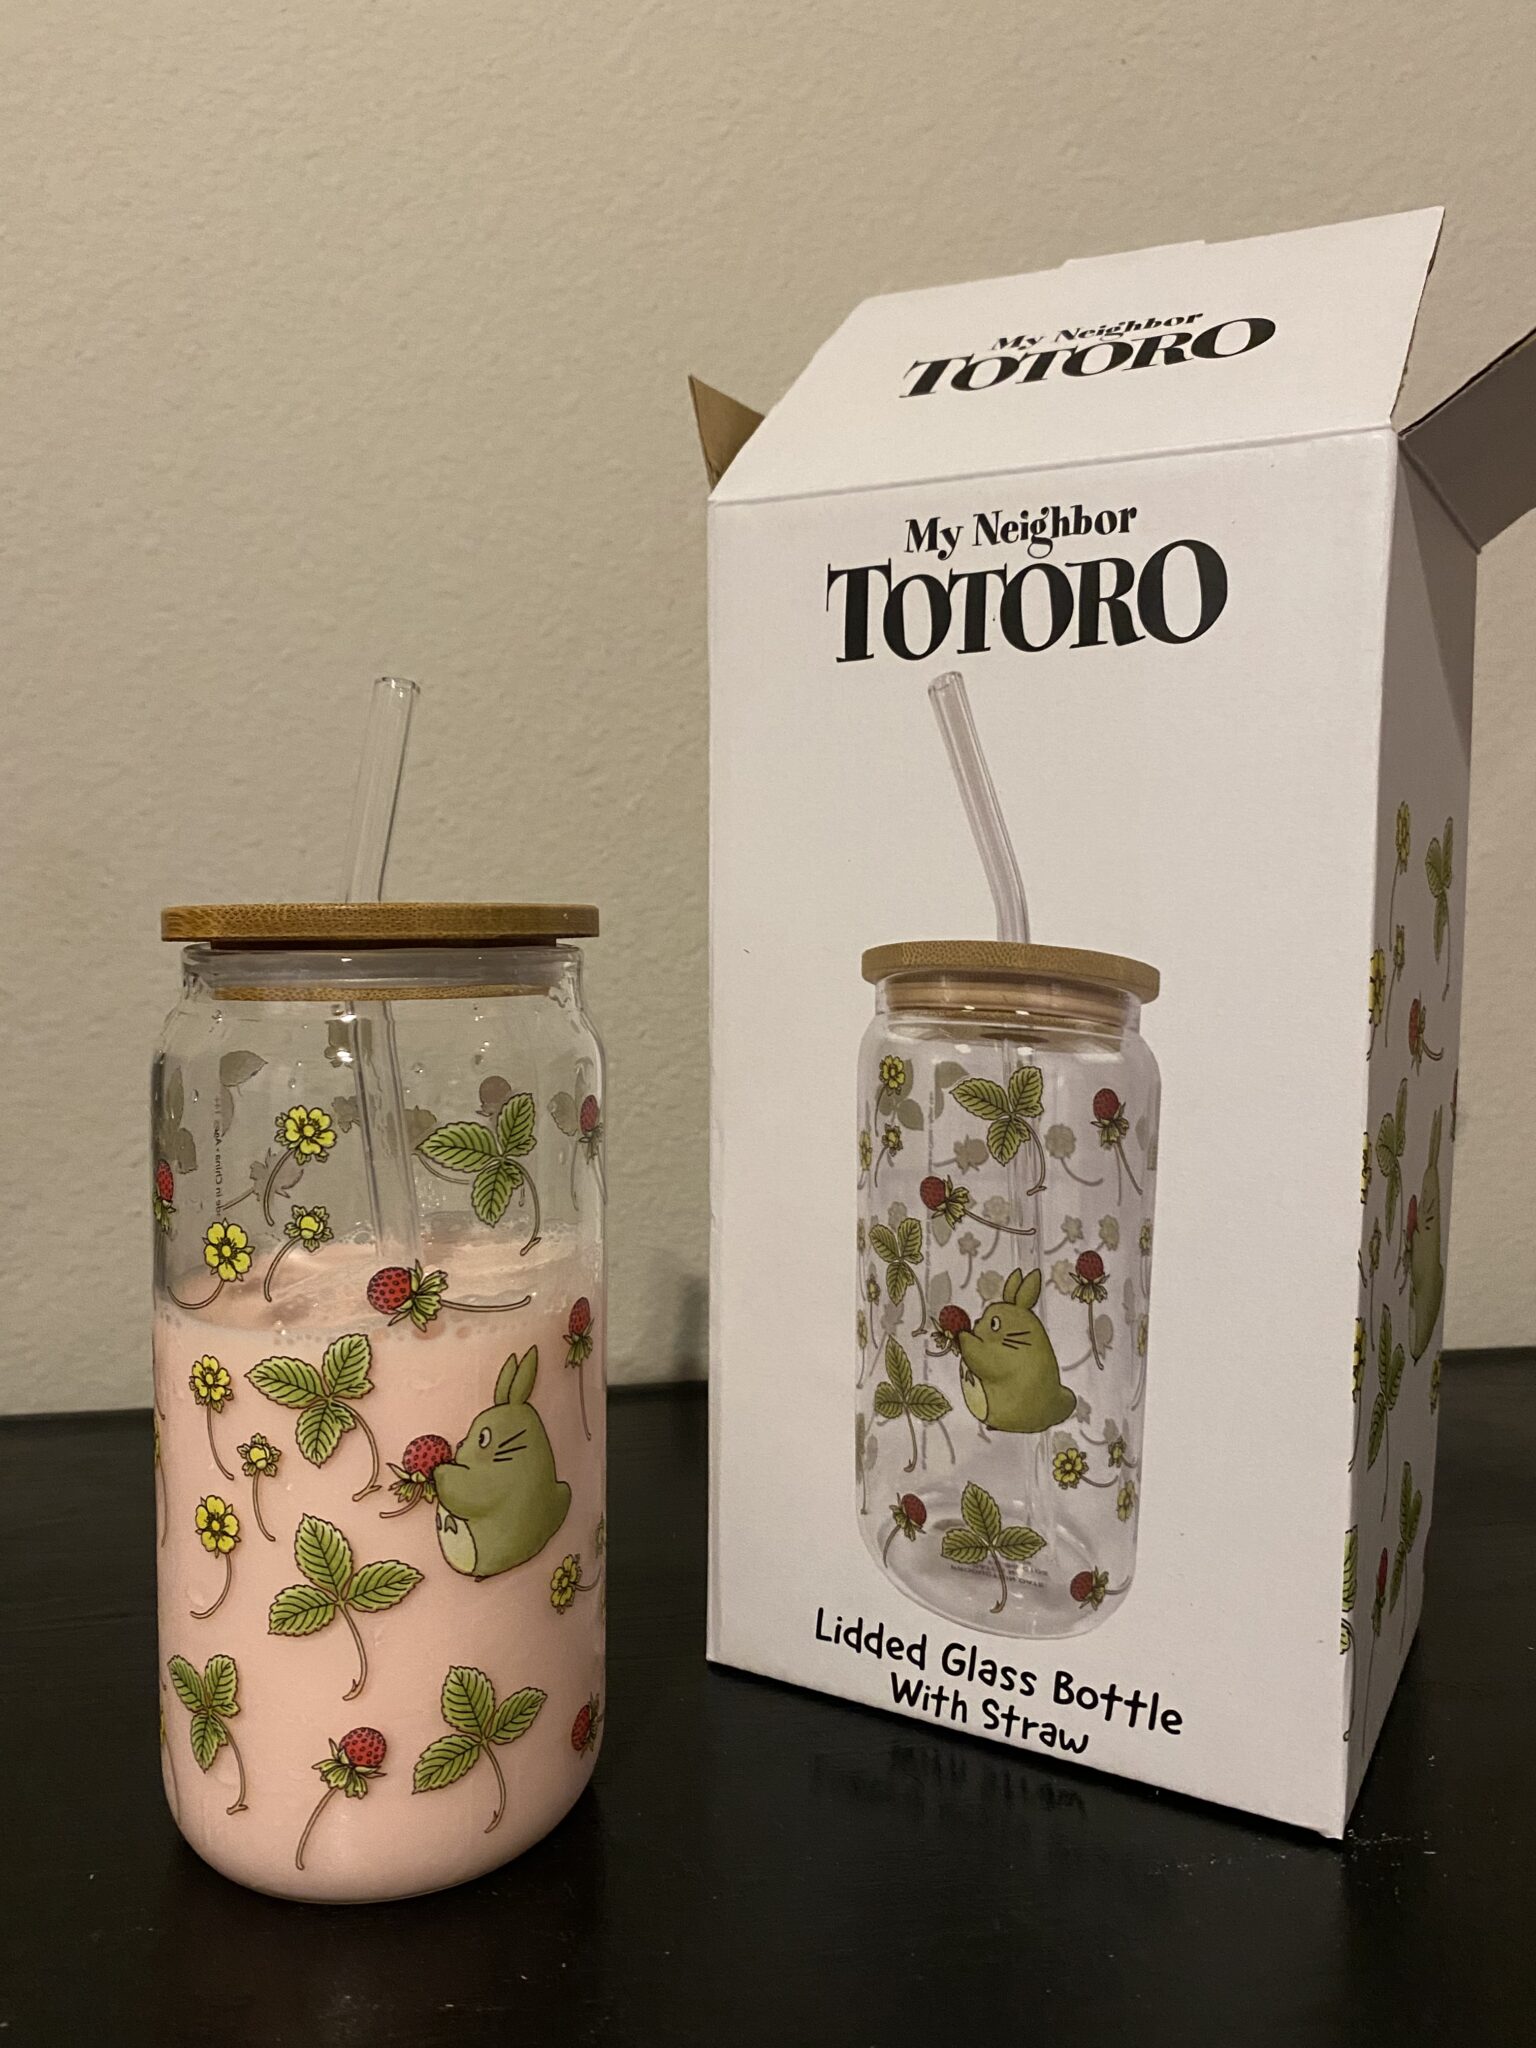 a glass cup with pink liquid next to a box showing the cup in its packaging